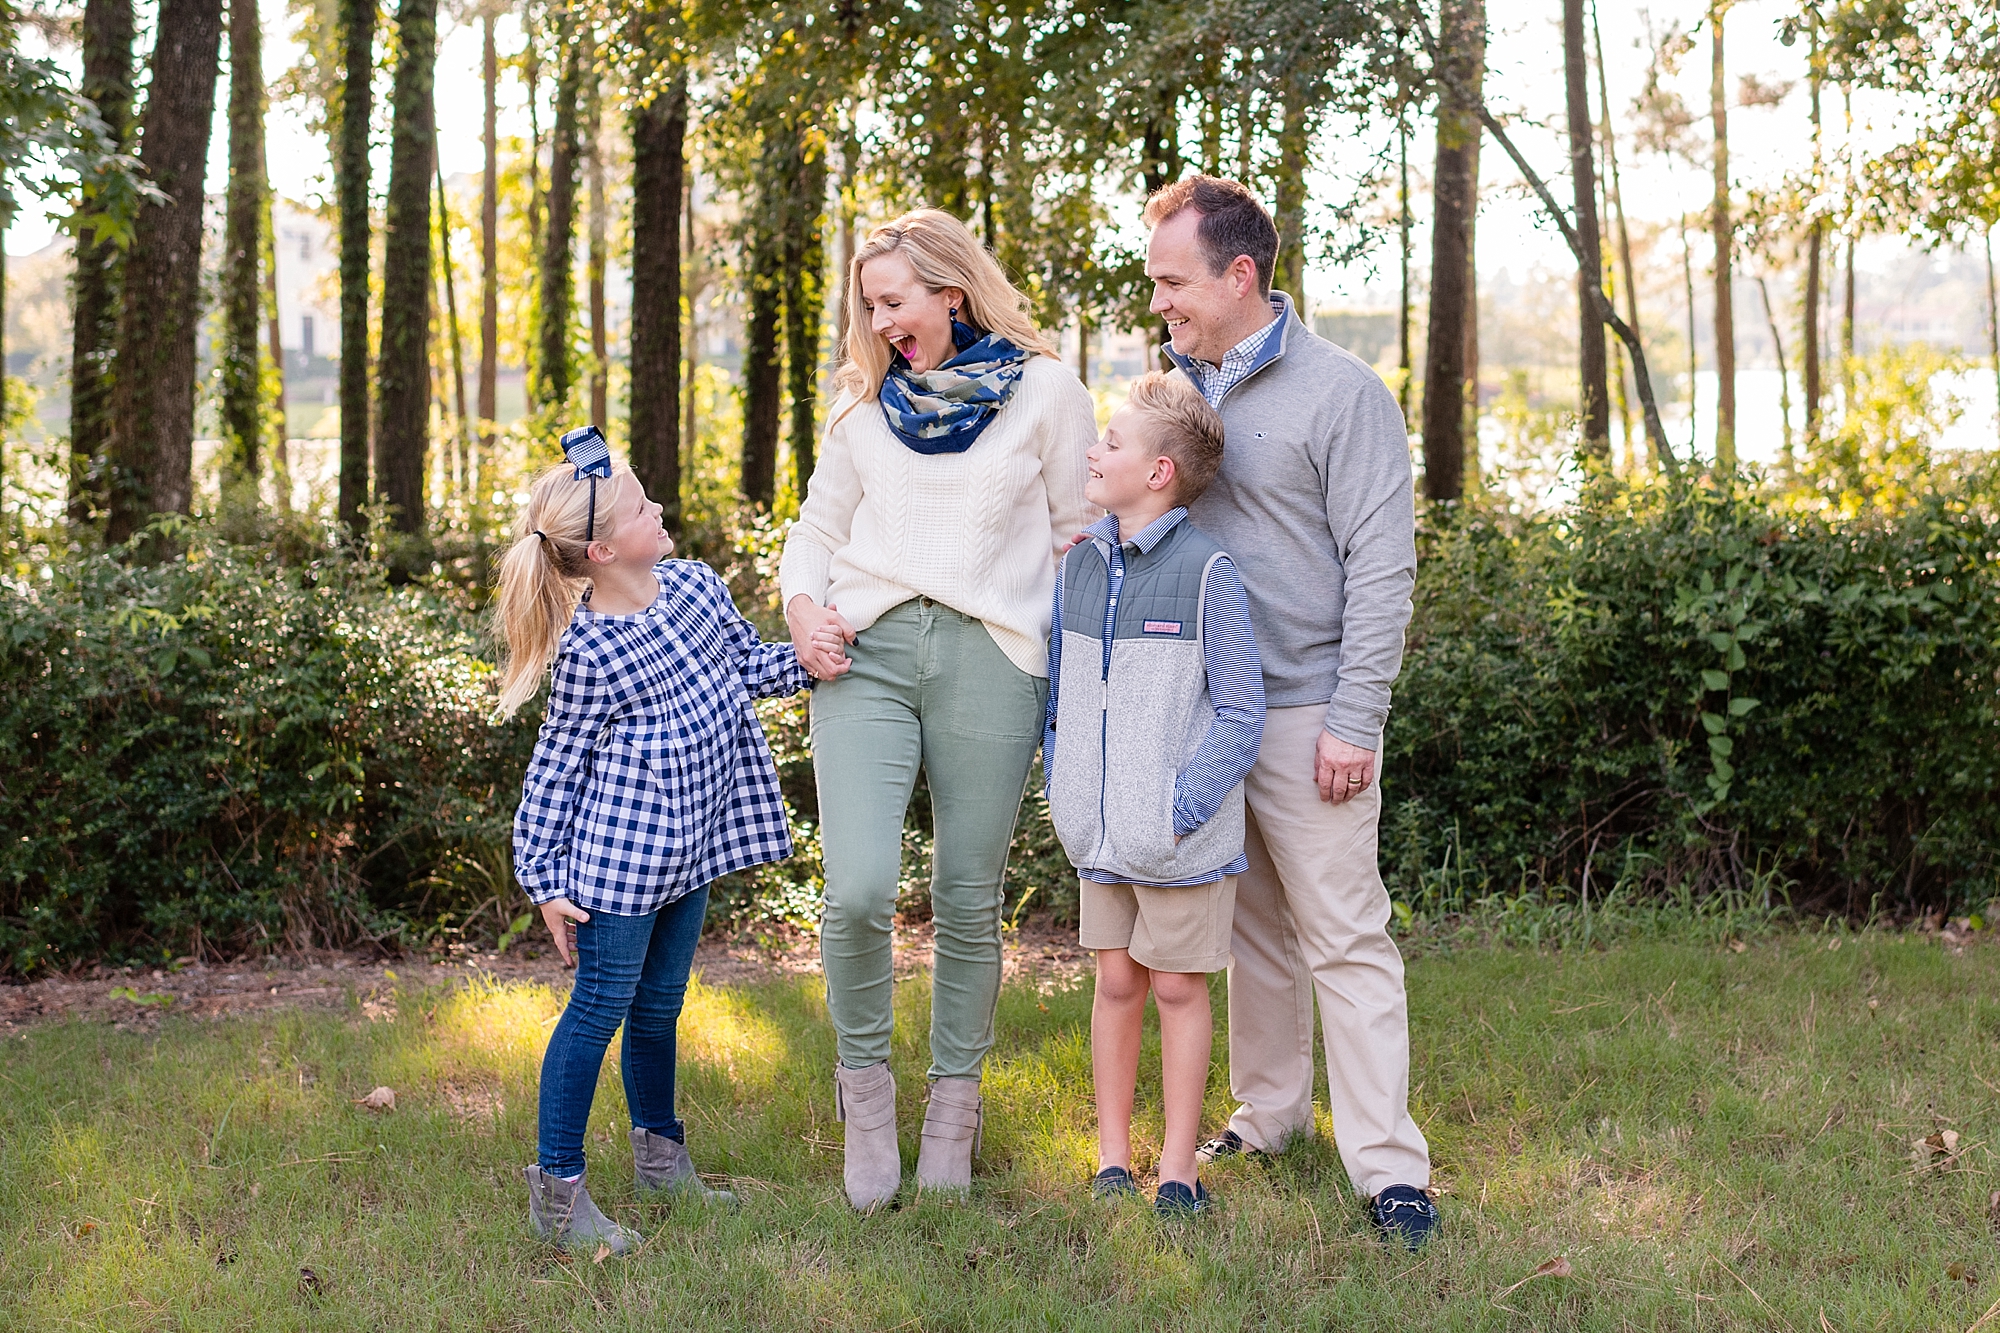 Cute Fall Family Photo Outfit Ideas featured by popular Houston life and style blogger, Fancy Ashley